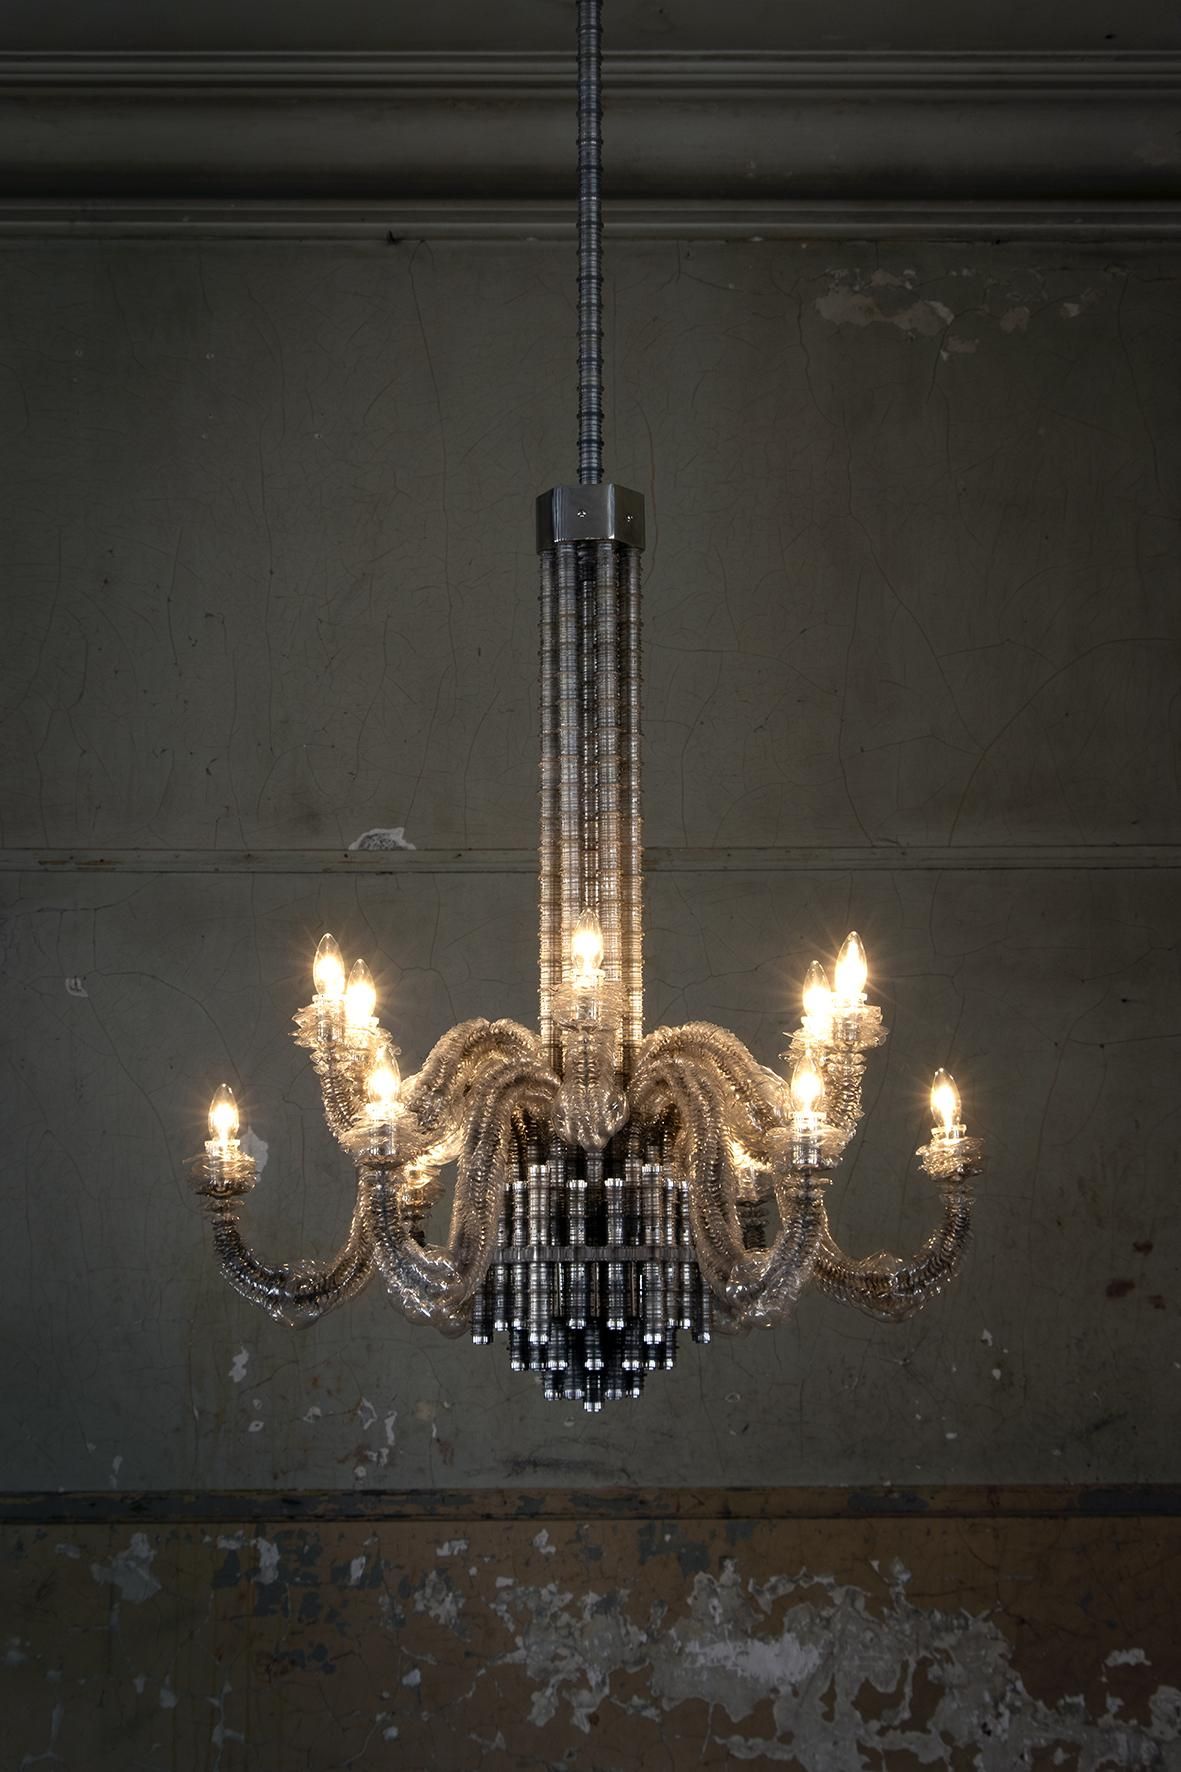 © Thierry Jeannot Physophora Chandelier courtesy ammann//gallery